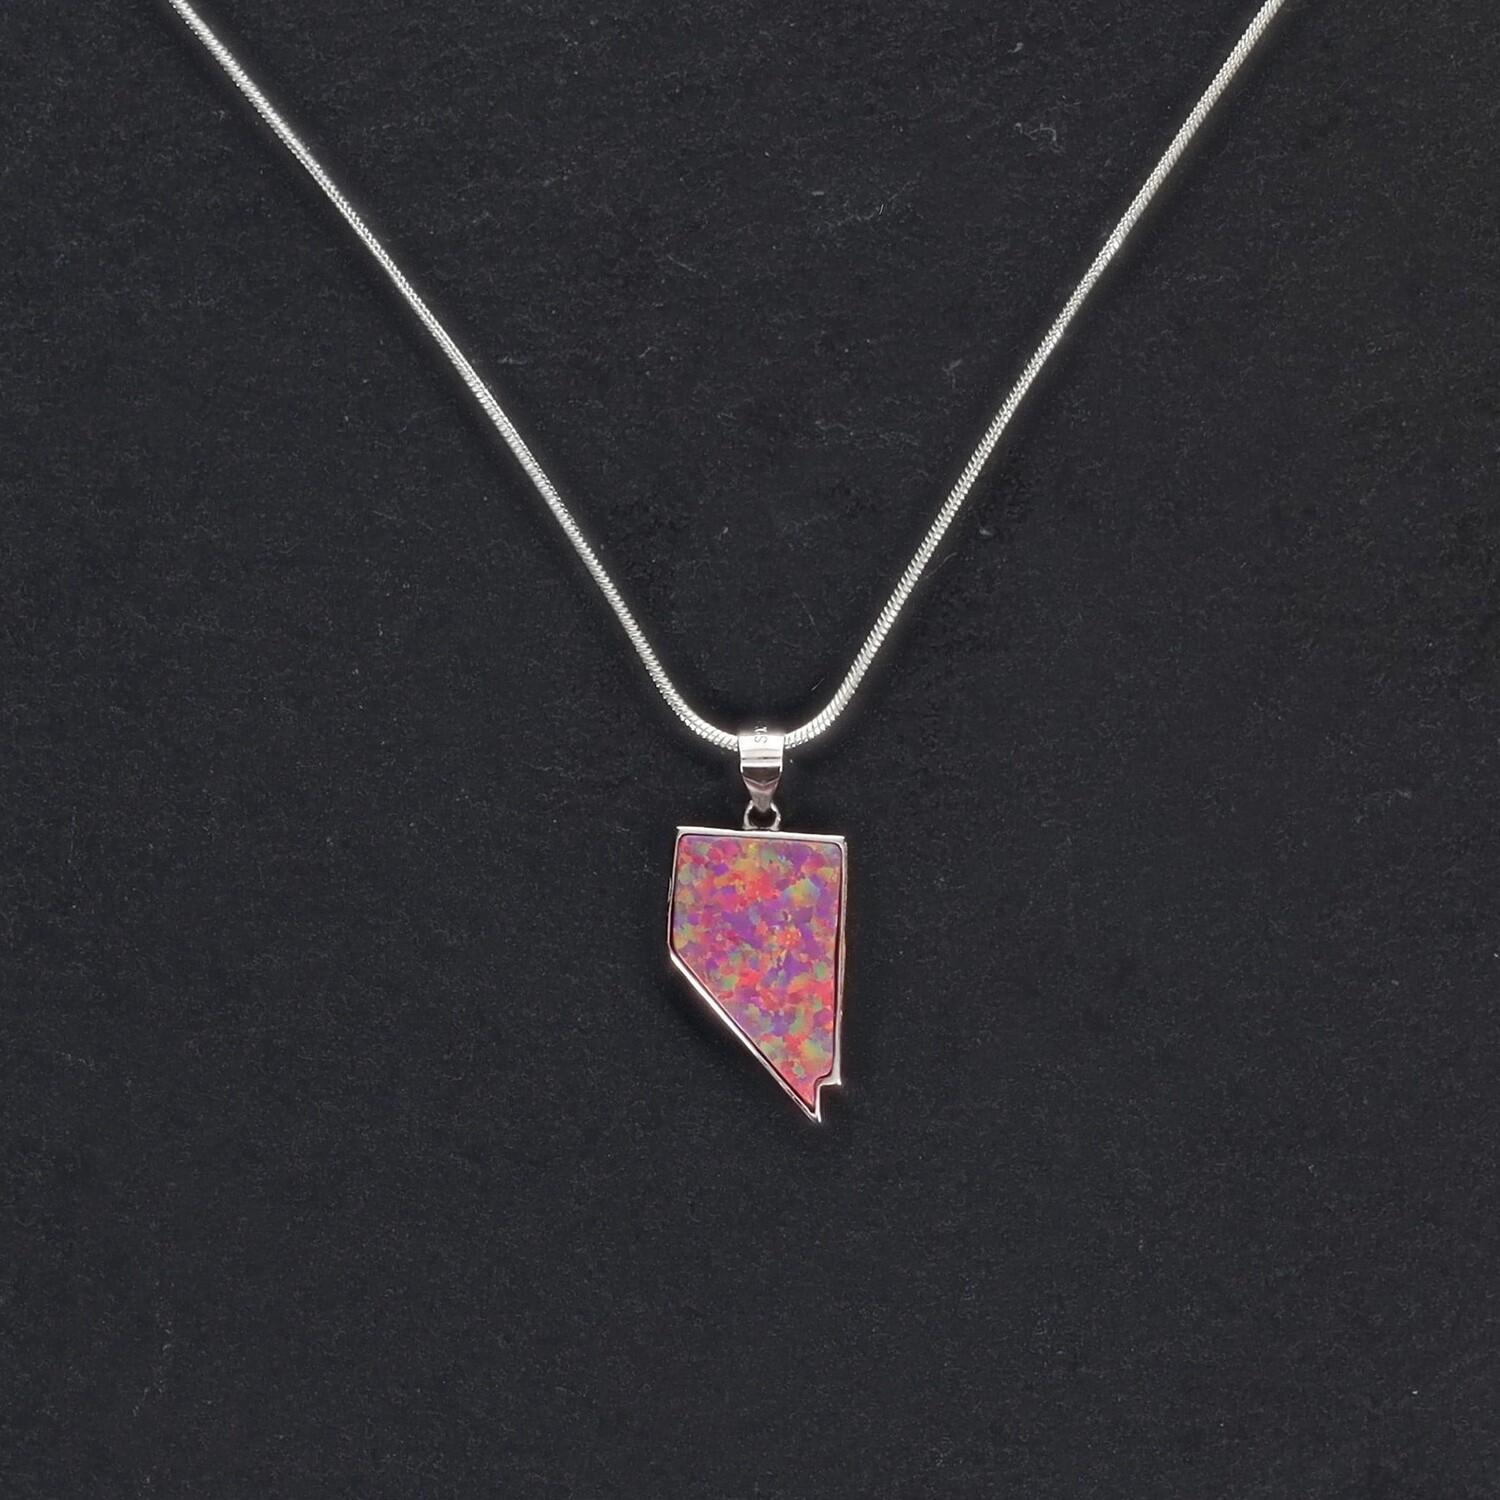 Pink Fire Opal Nevada Necklace, Large